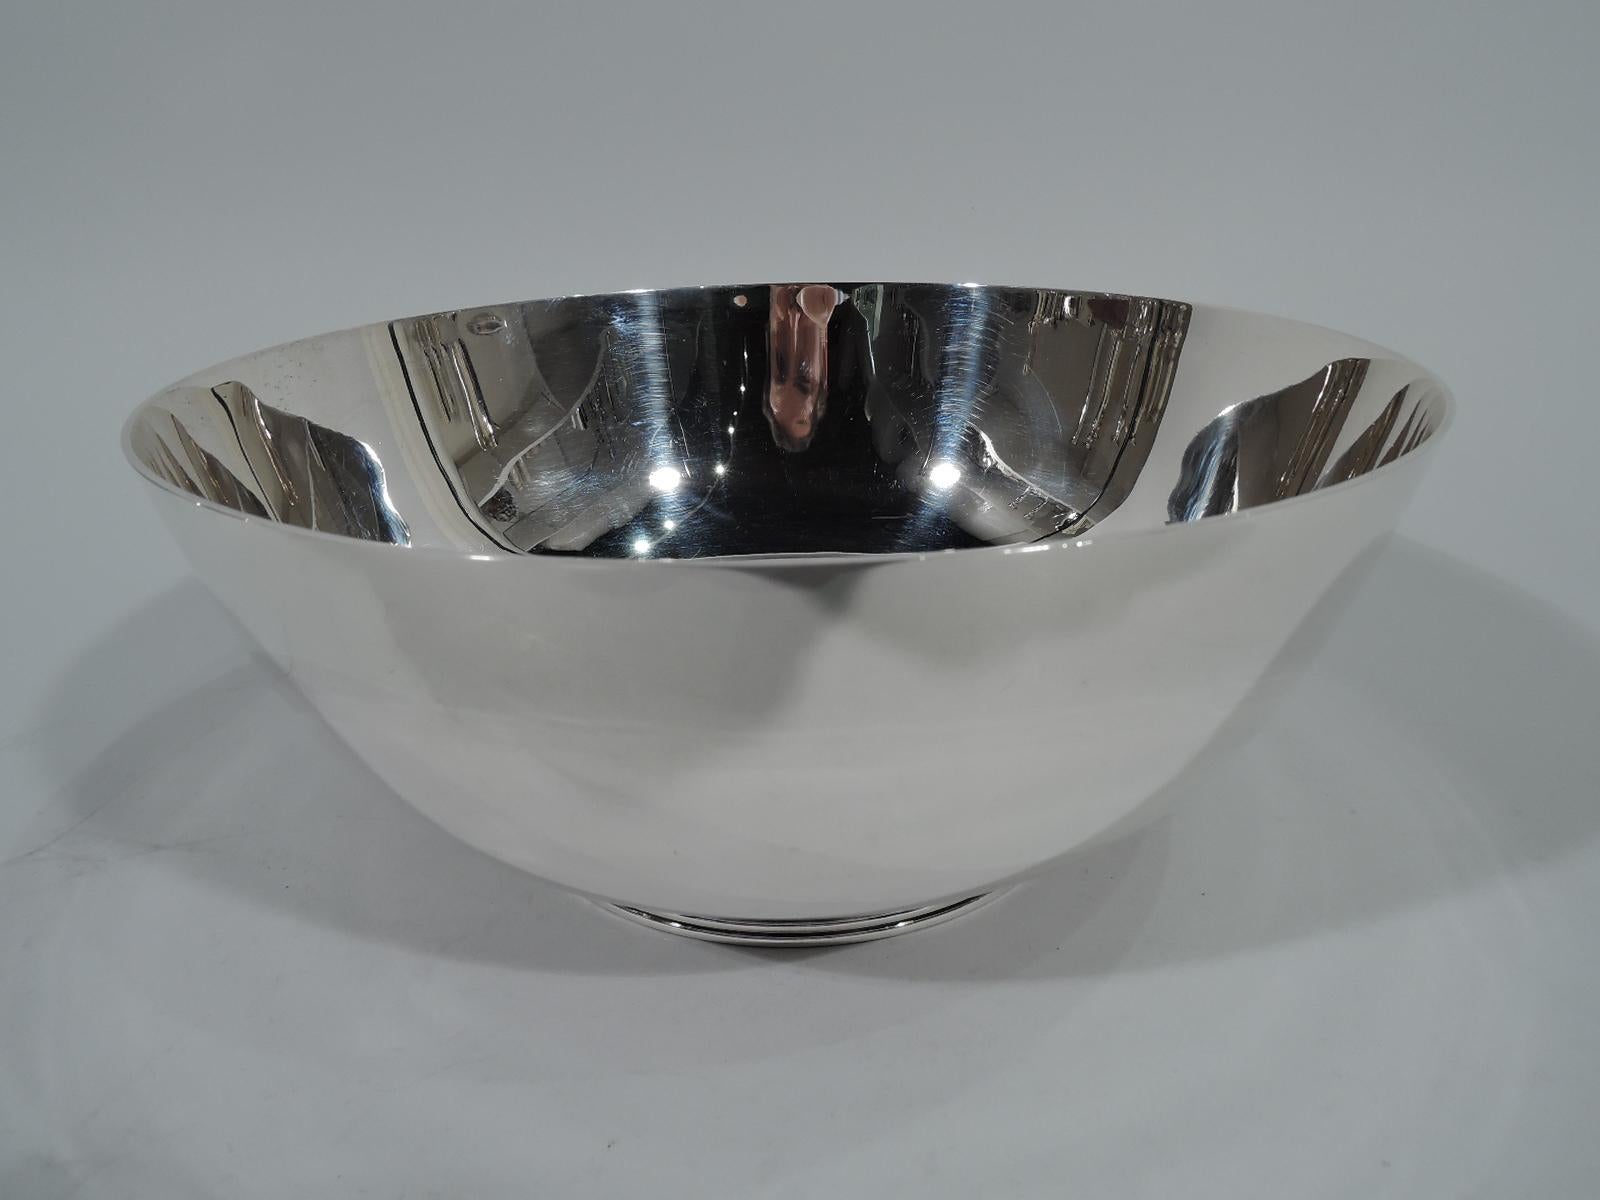 Art Deco sterling silver bowl. Retailed by Cartier in New York, circa 1930. Tapering and curved bowl. Inset circular foot with horizontal ribbed bands. A stylish design with the exciting element discreetly tucked under. Hallmark includes no. 227X.